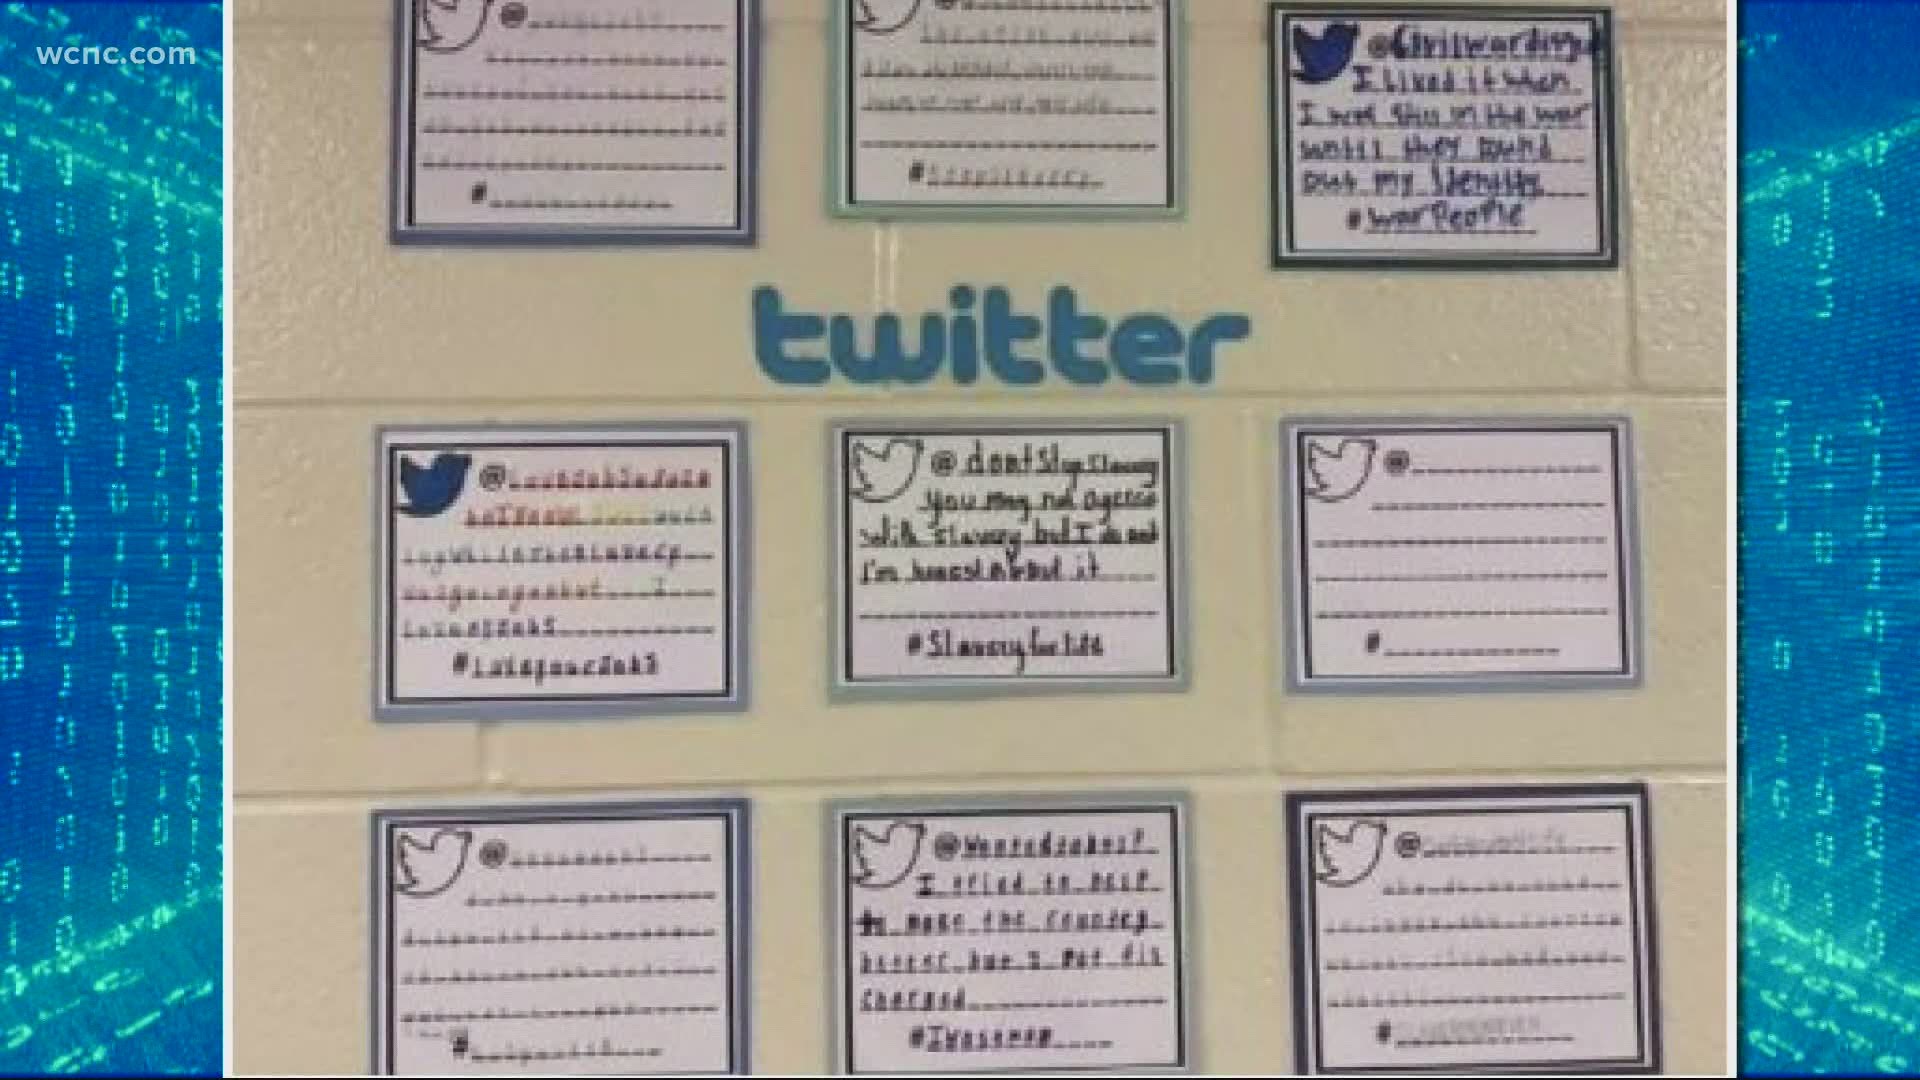 An assignment at Waxhaw Elementary School had students roleplaying during the Civil War era and lead to the usage of fake hashtags such as #SlaveryForLife.